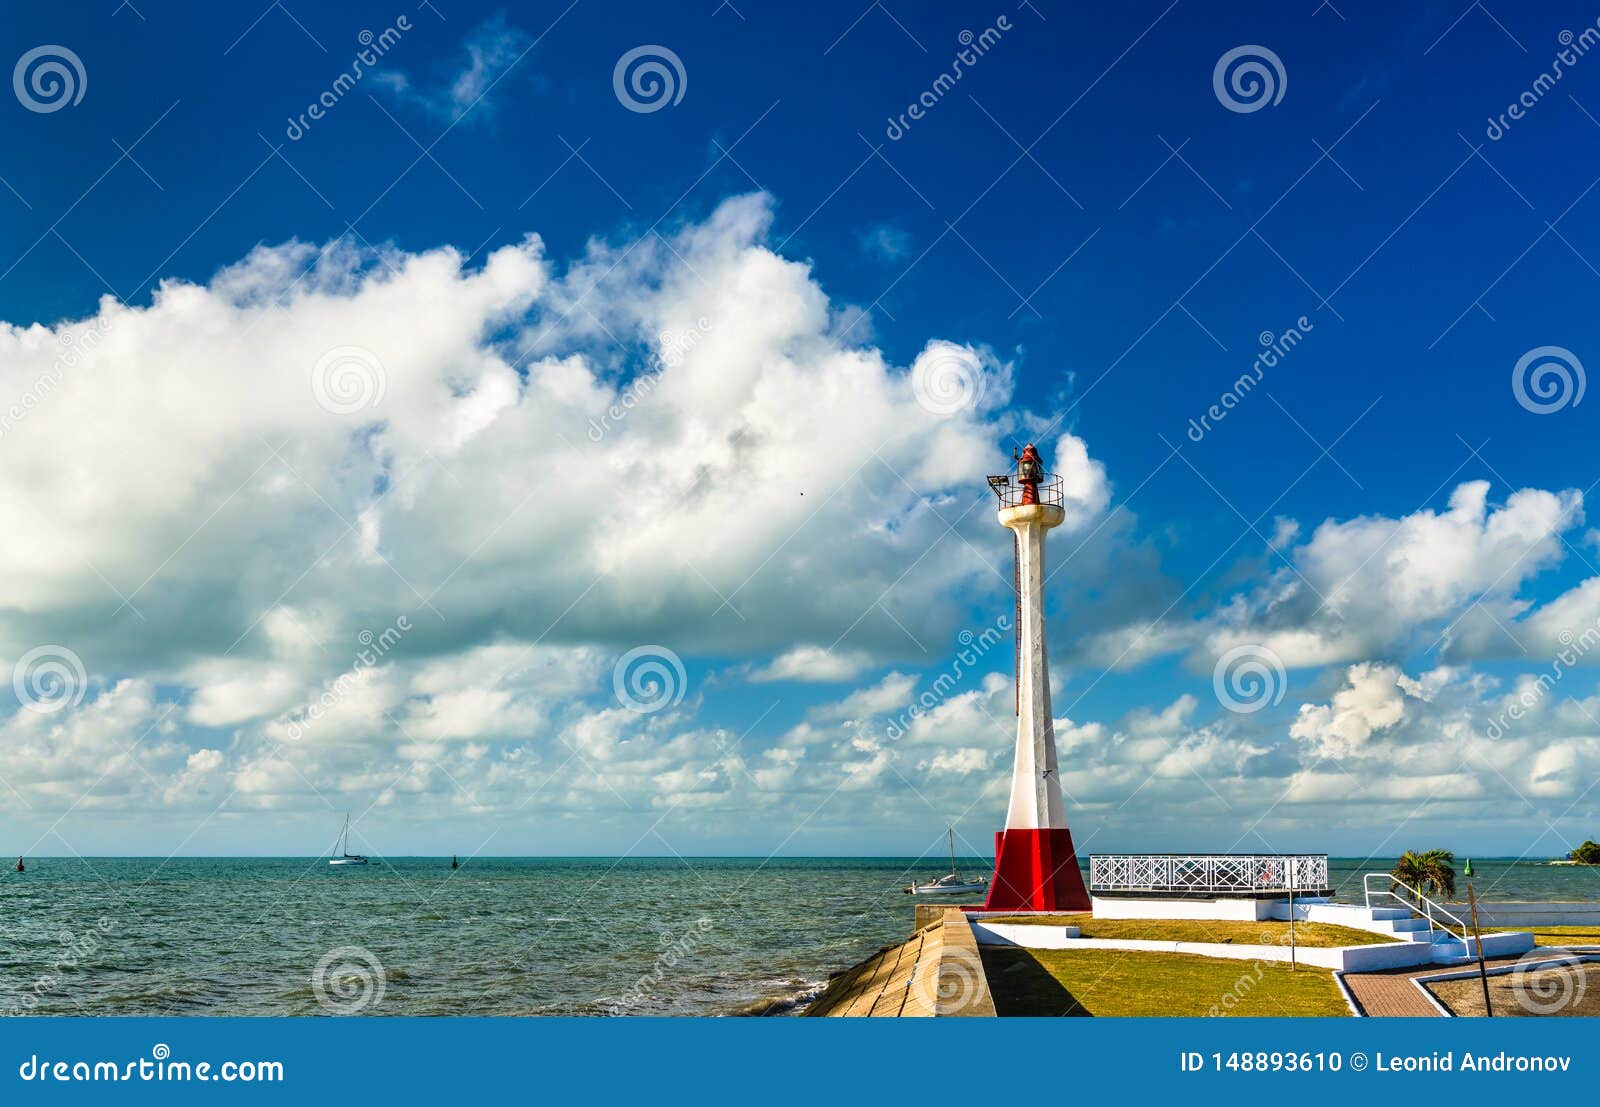 baron bliss lighthouse in belize city